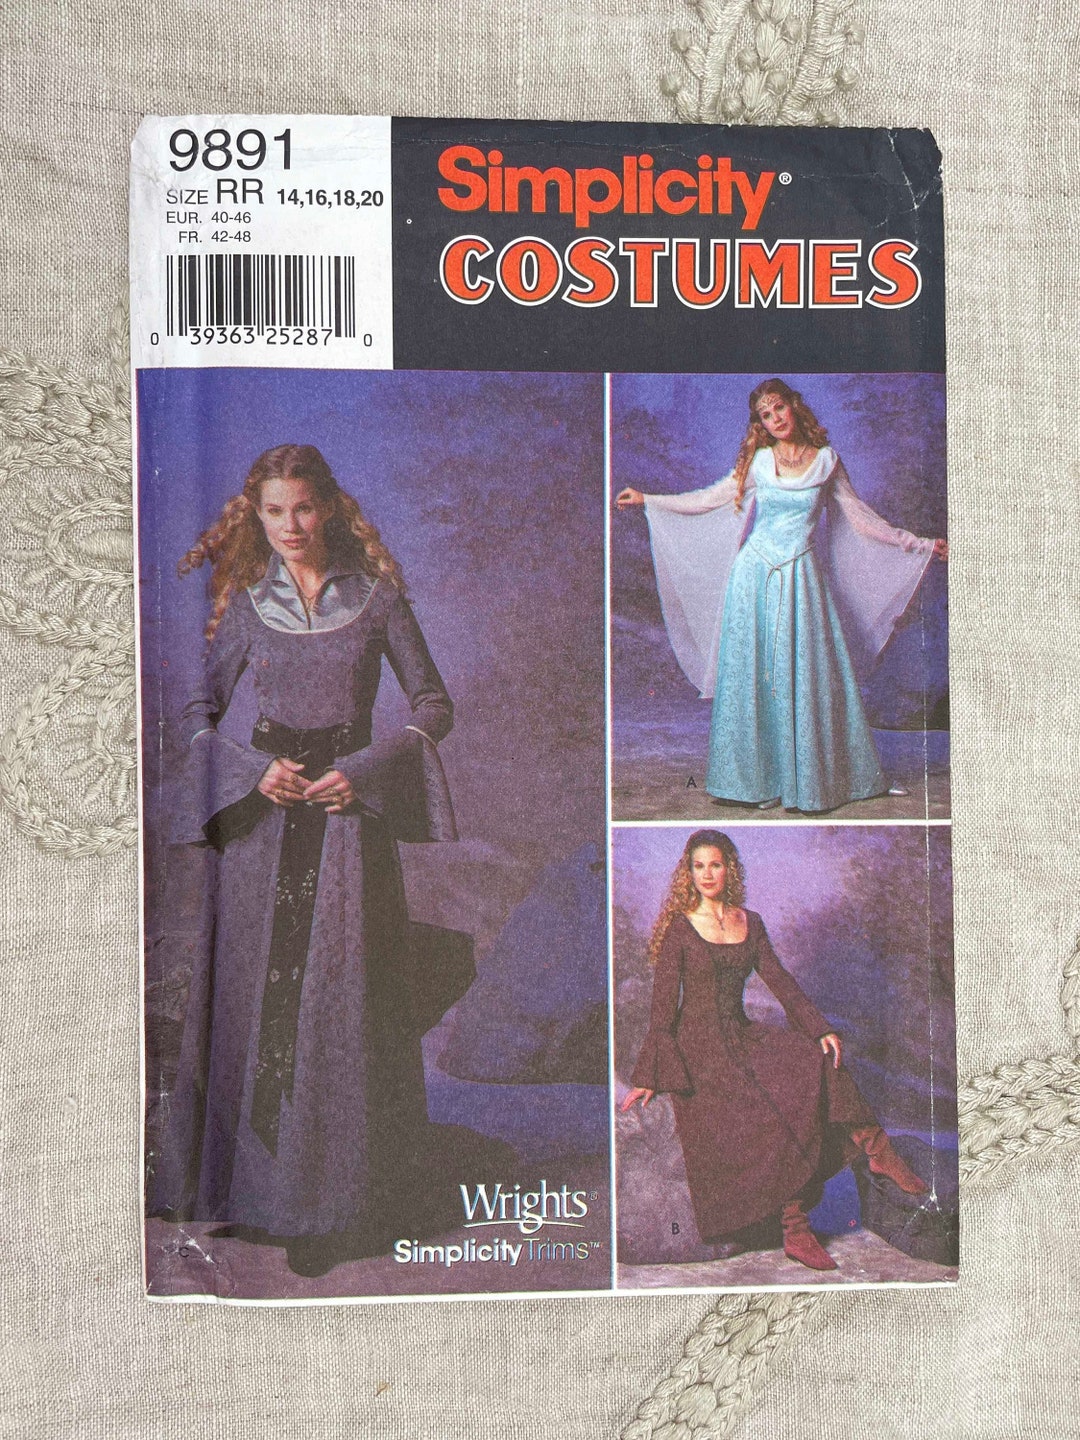 Simplicity 9891 Medieval Fantasy Costume Pattern With Angel - Etsy